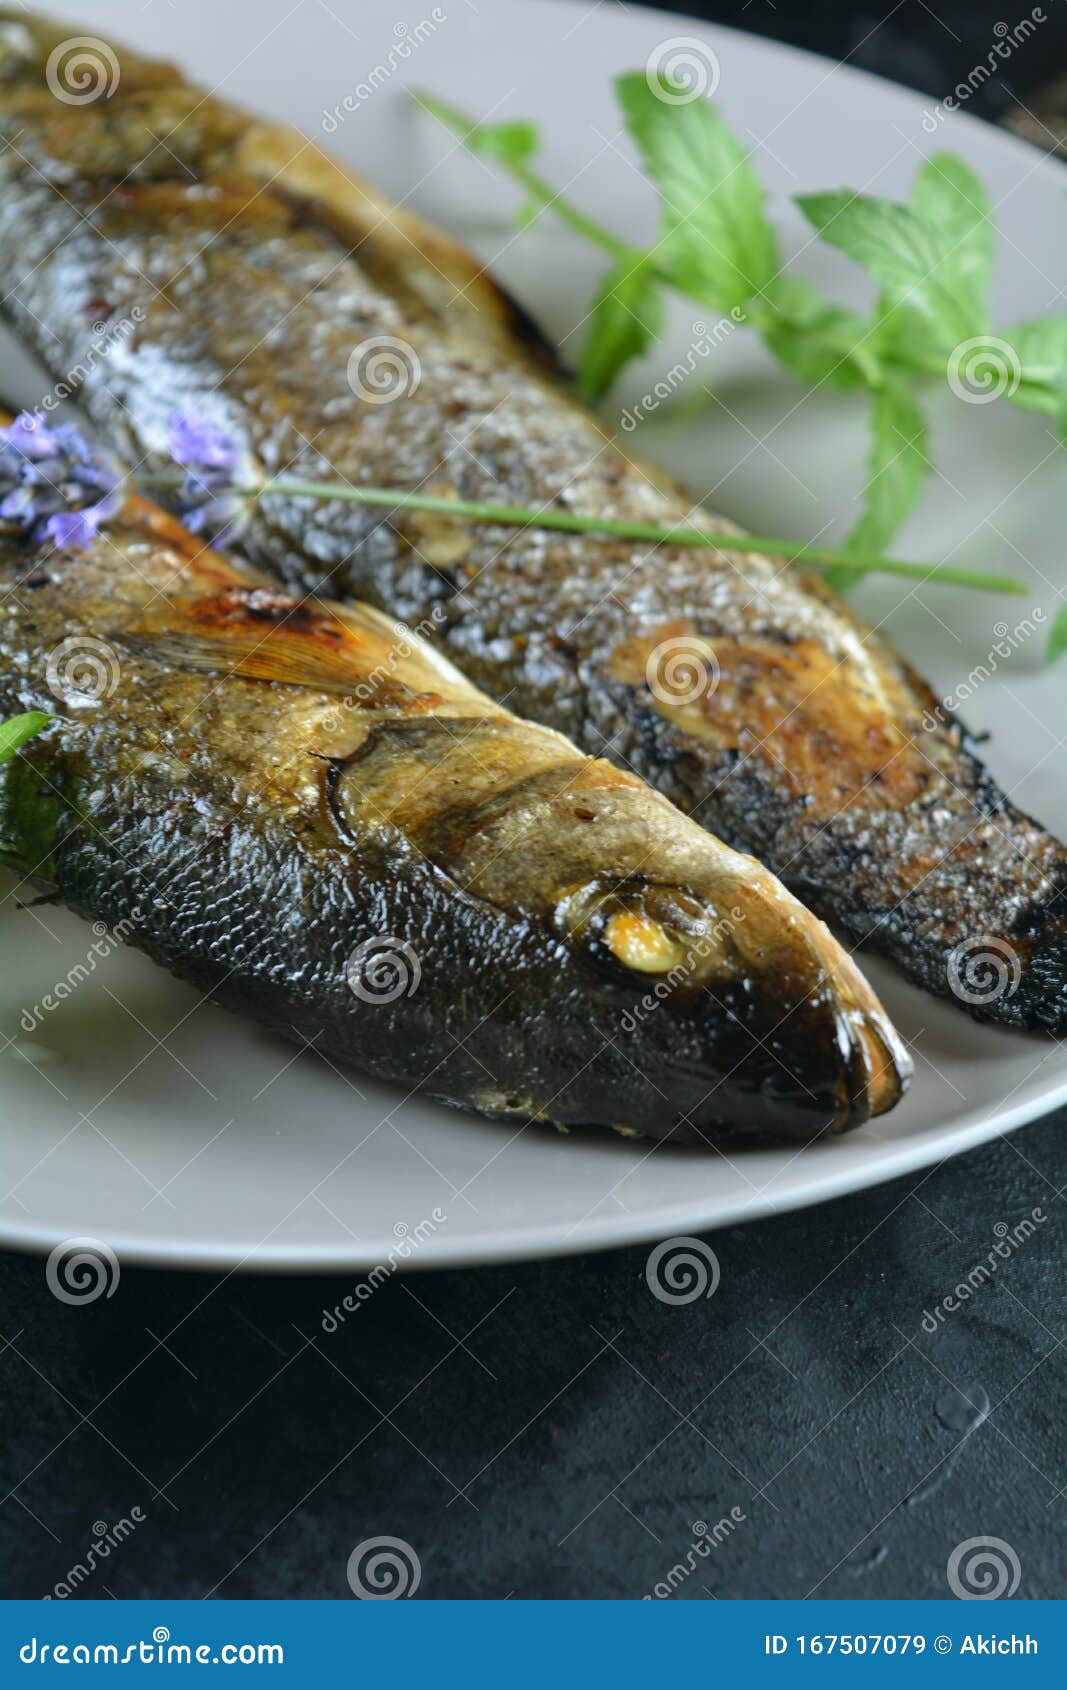 Oven Baked Mediterranean Sea Bass - a Healthy Protein Meal Stock Image ...